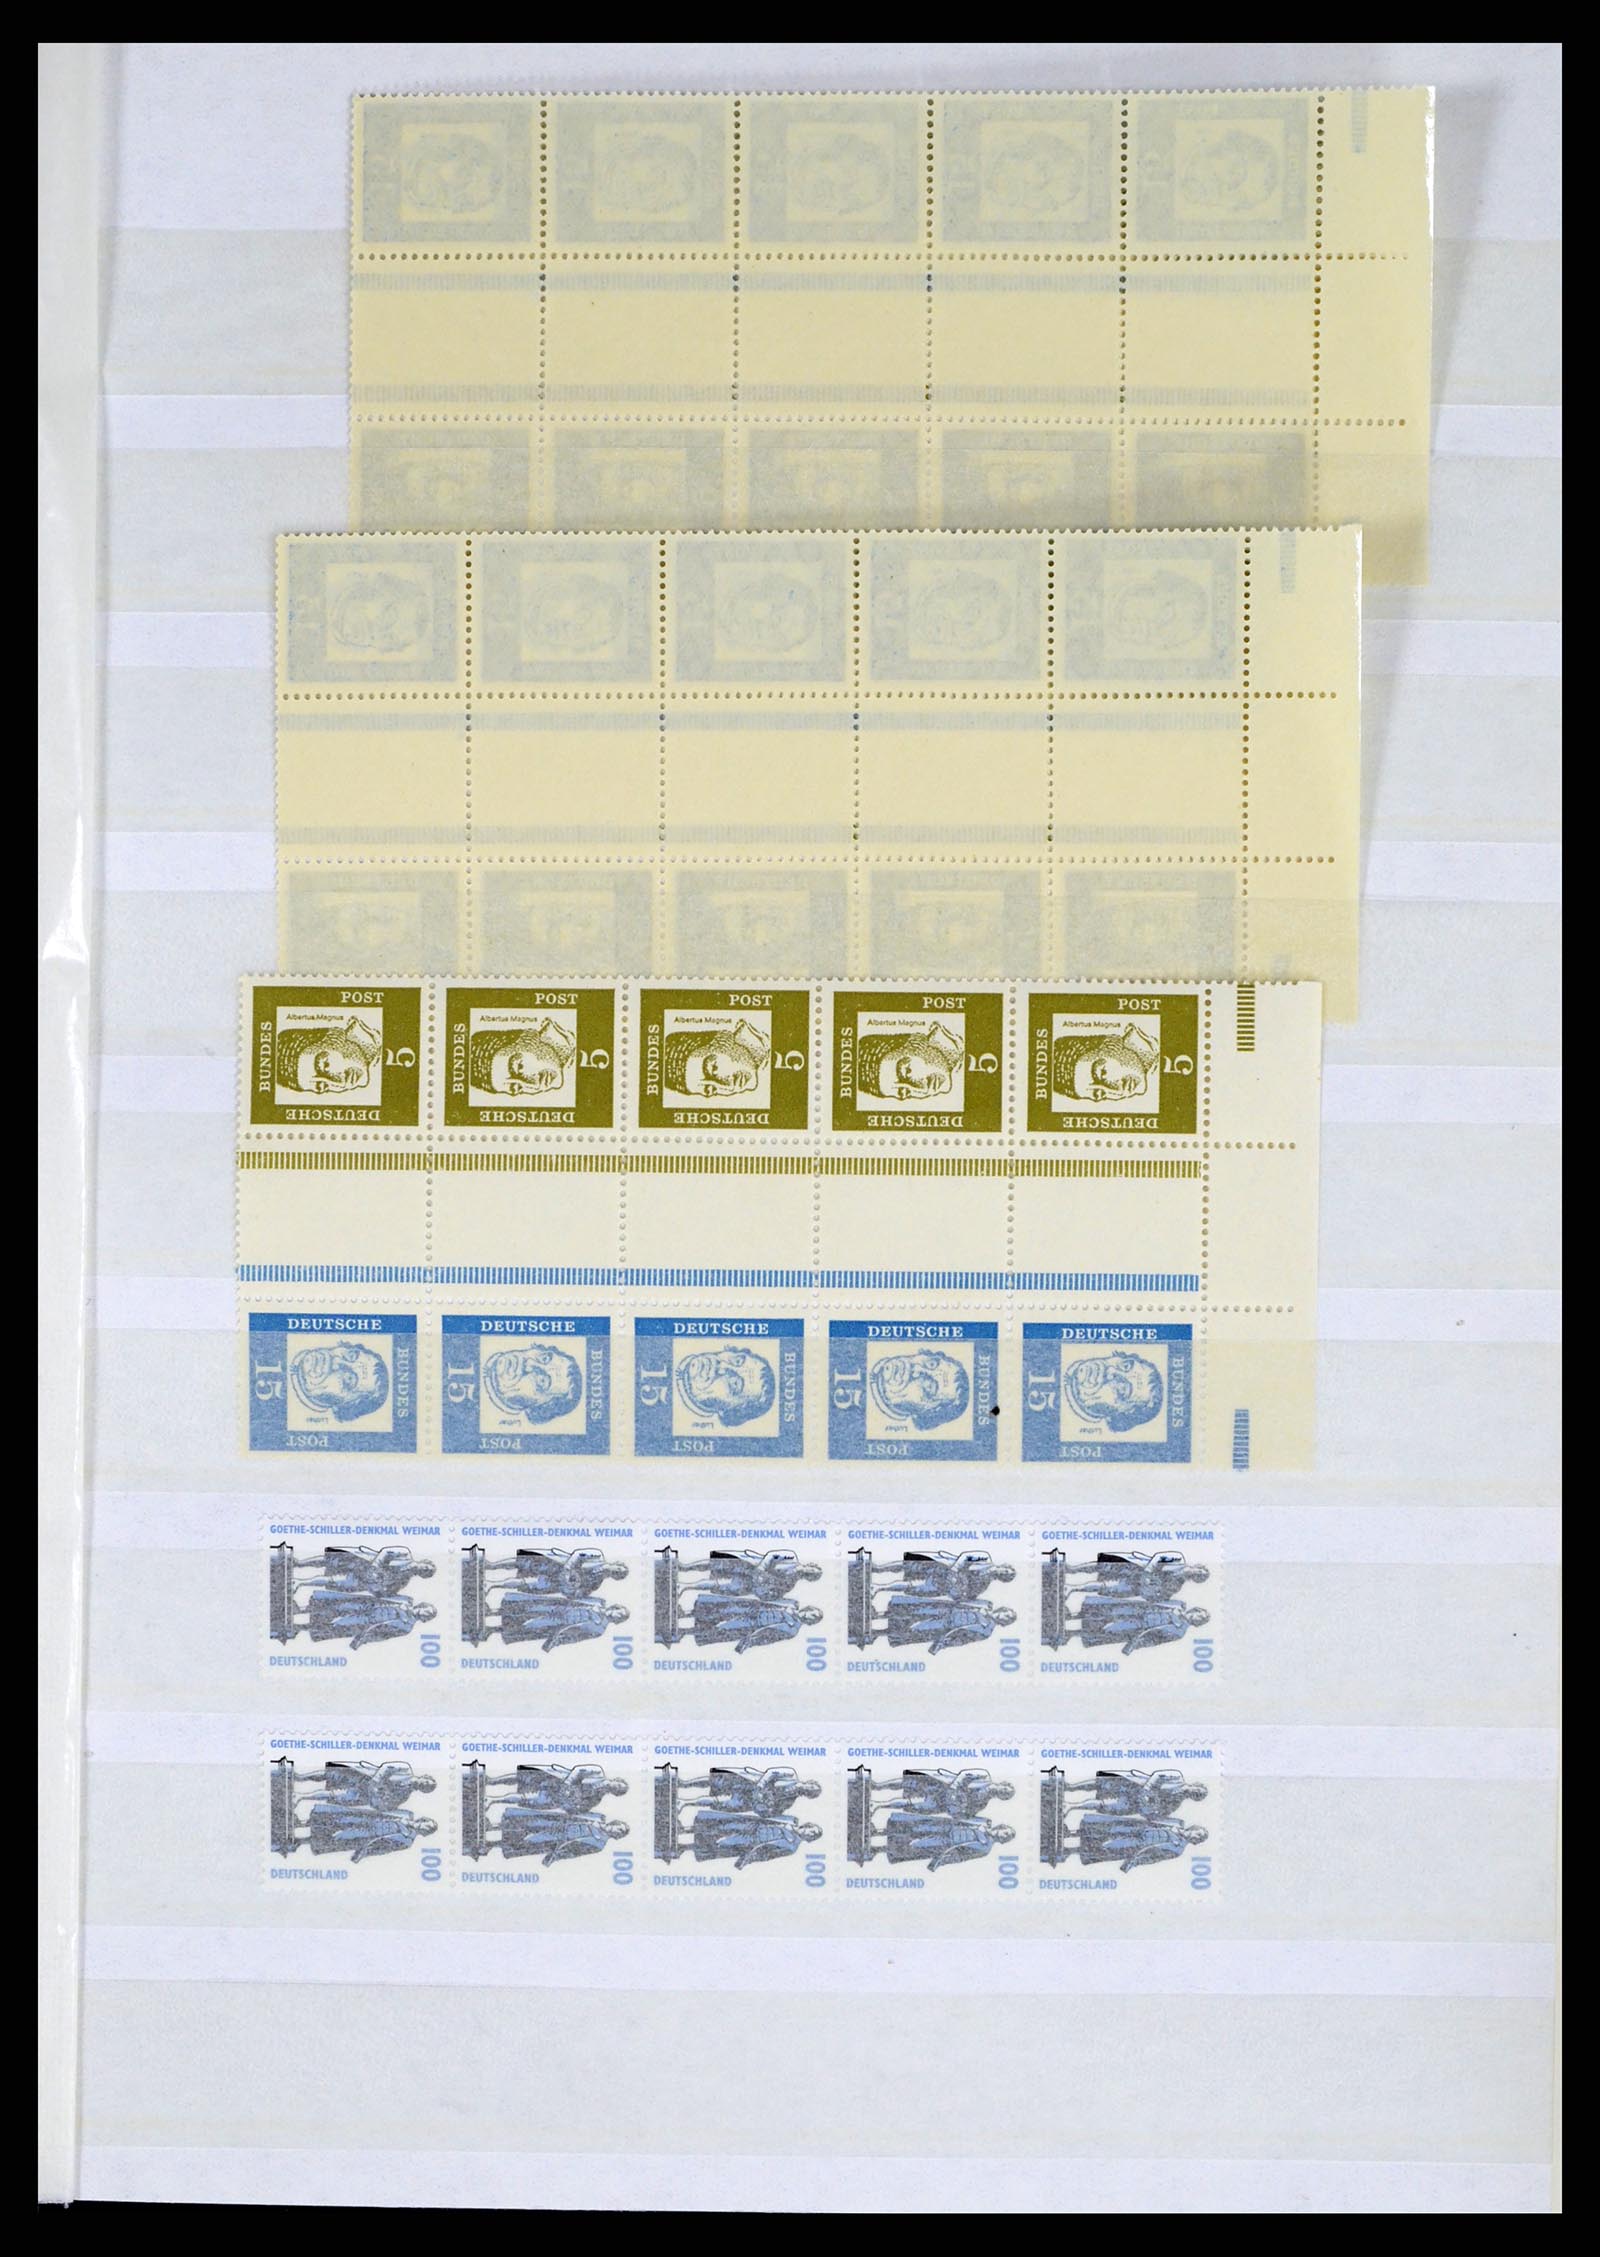 37354 081 - Stamp collection 37354 Bundespost and Berlin 1955-2000.